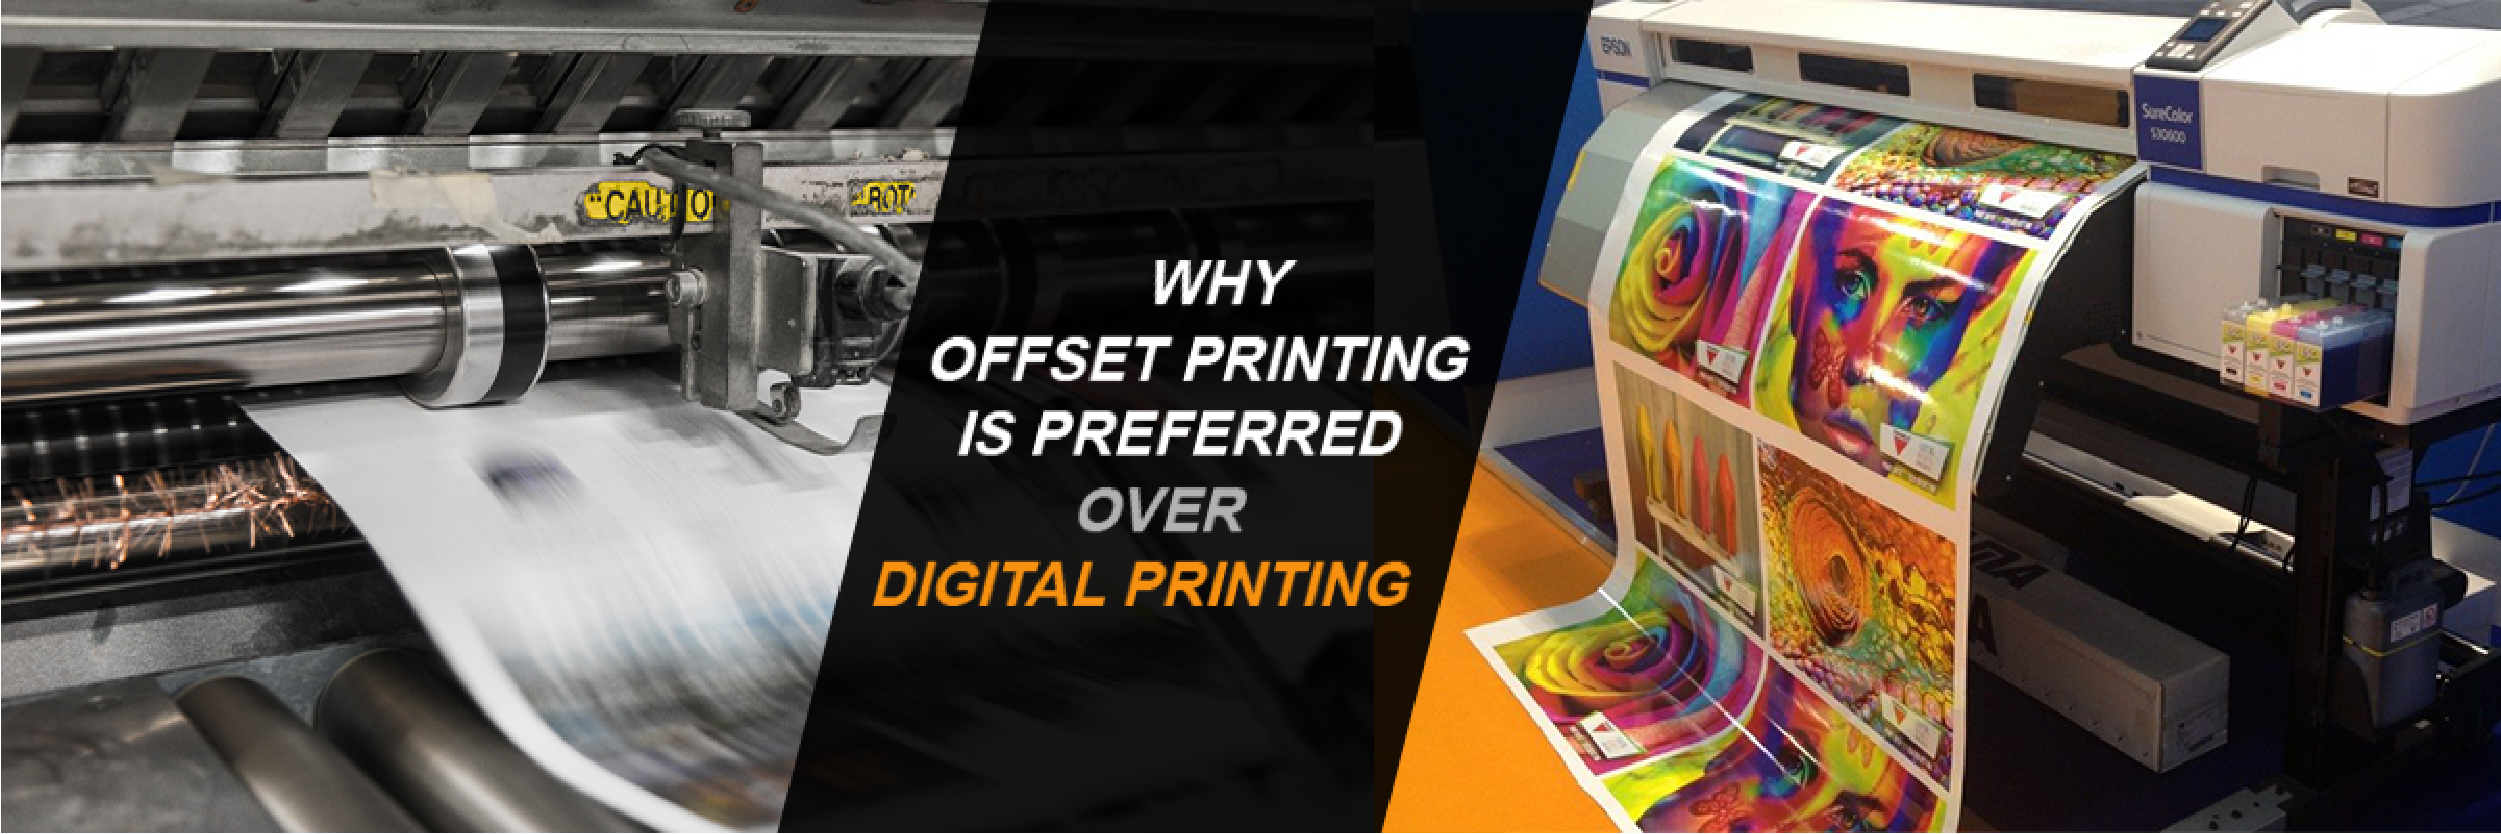 Why Offset Printing is Preferred over Digital Printing